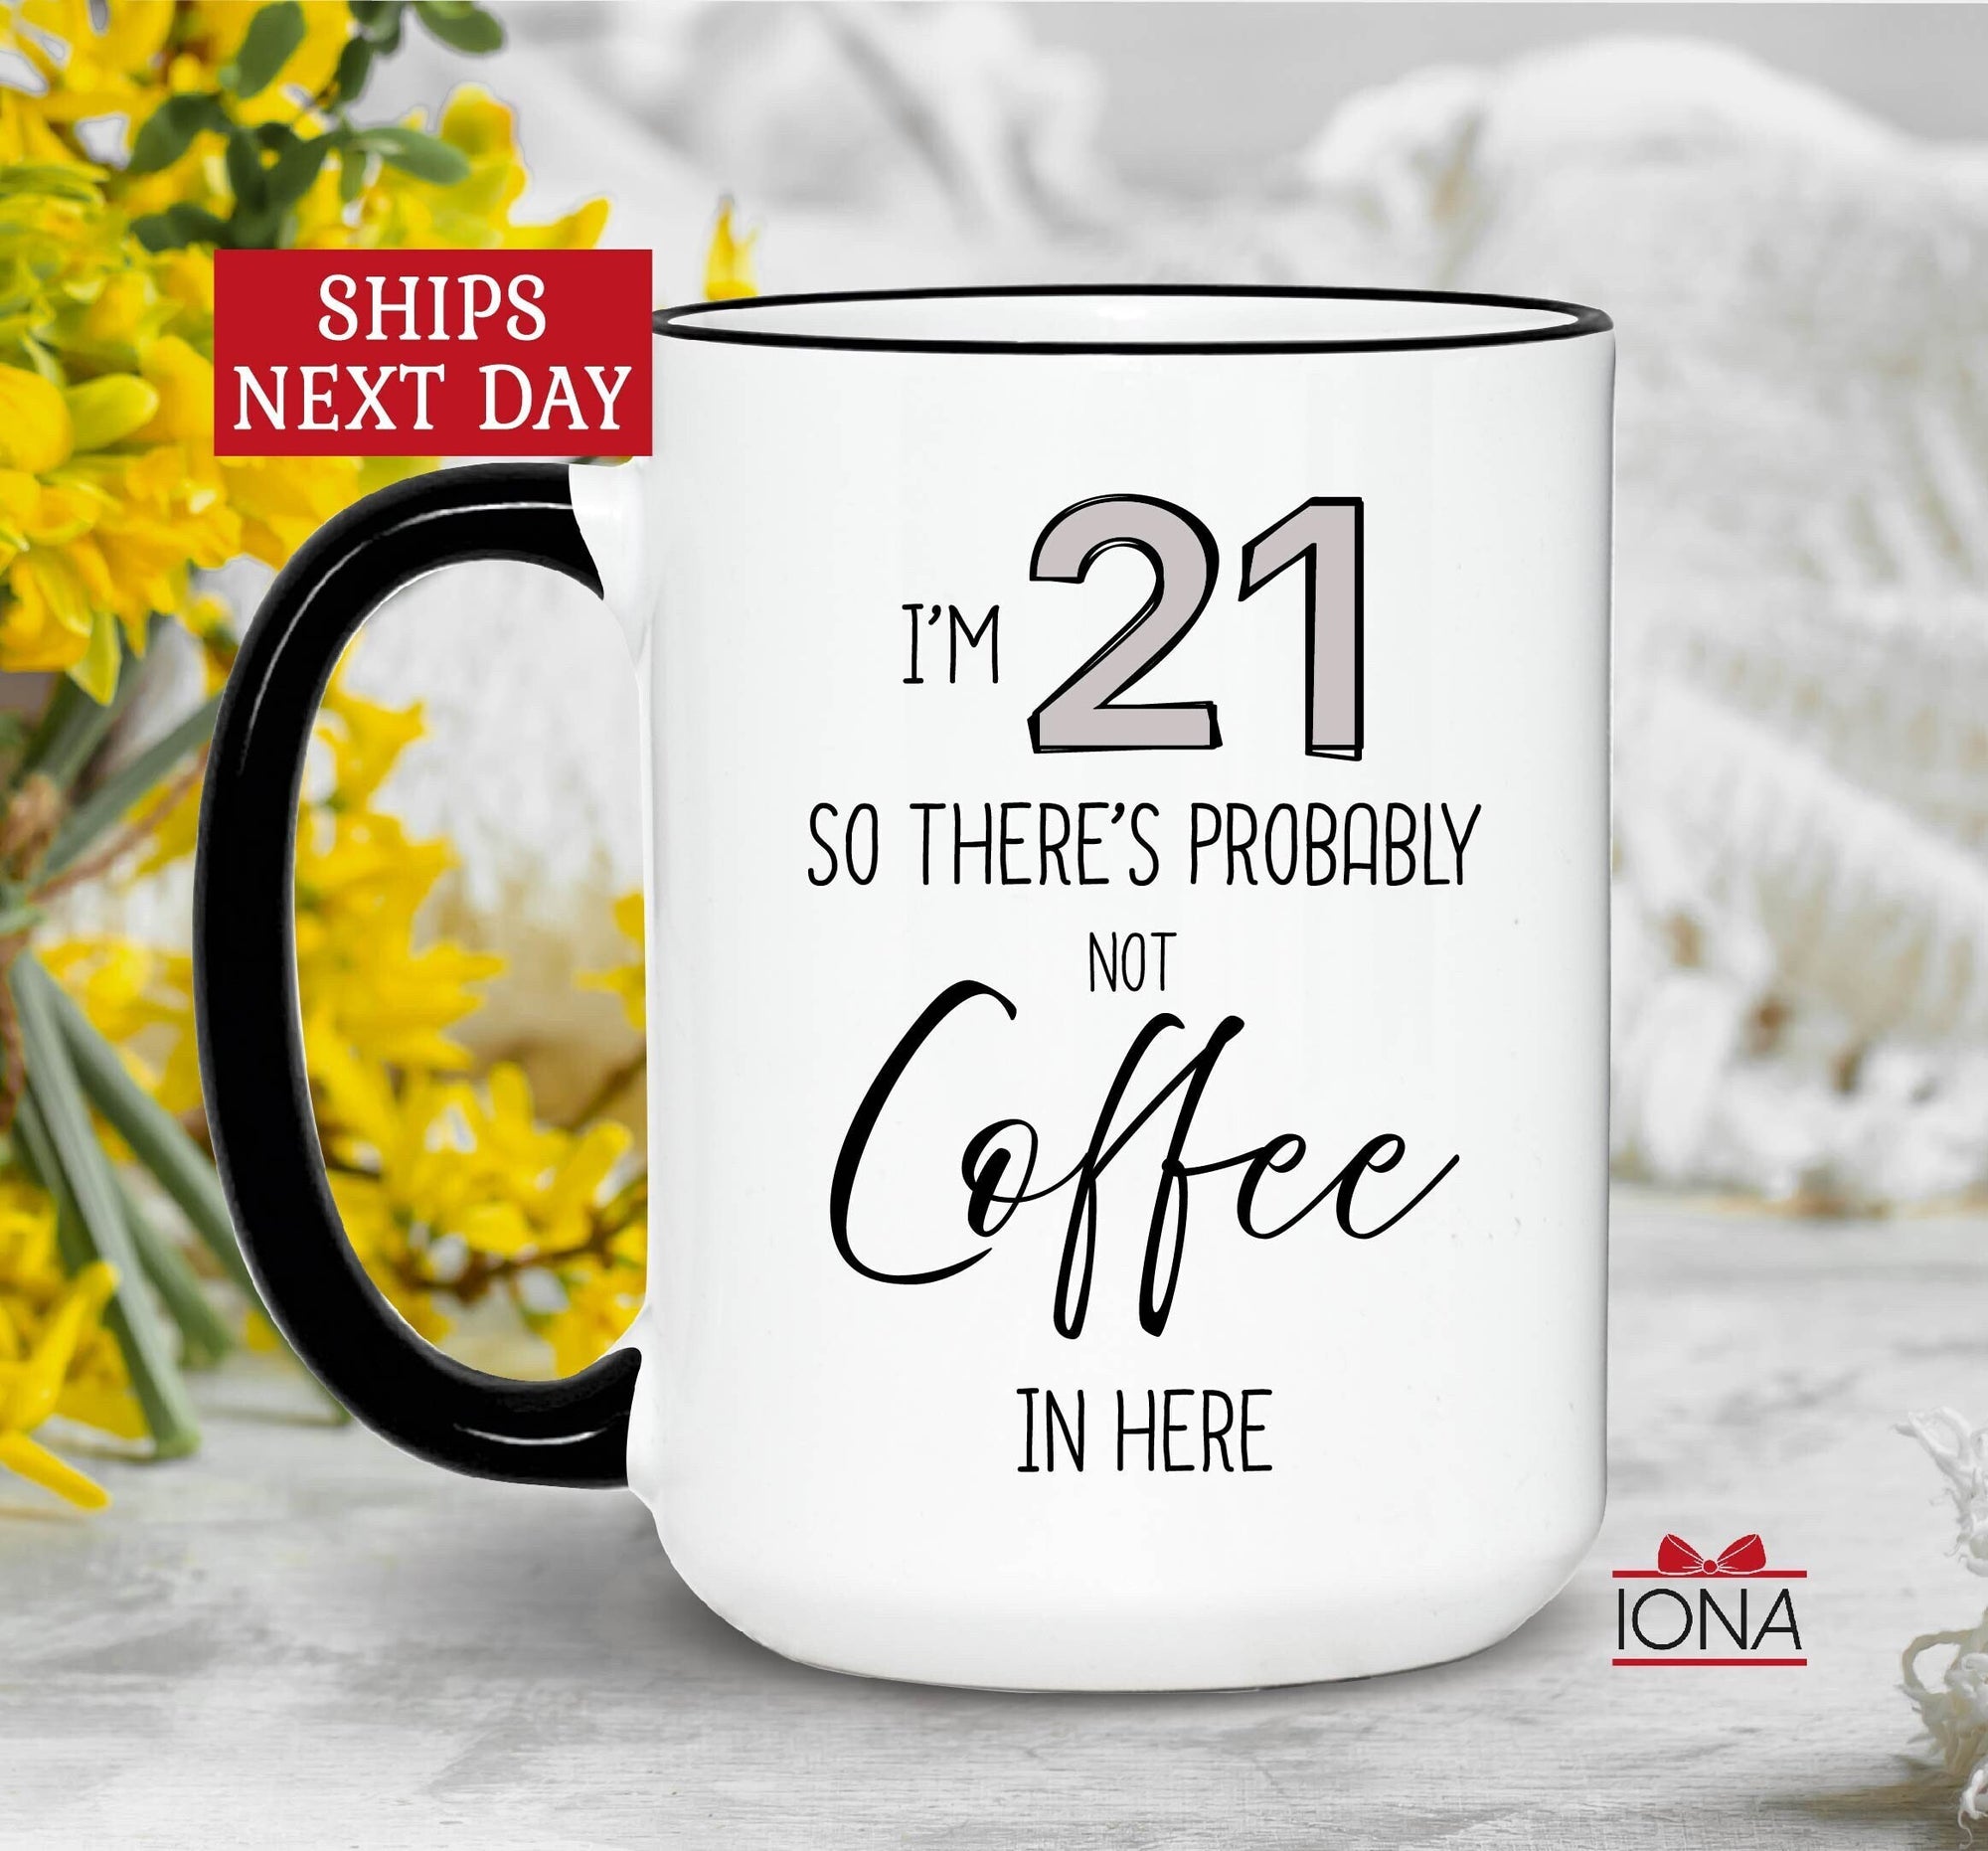 Funny 21st Birthday Gift Coffee Mug, Probably Not Coffee in here, 21 Years Old Mug, 21 Year Old, Daughter Sister in Law Teens Her Best Ideas